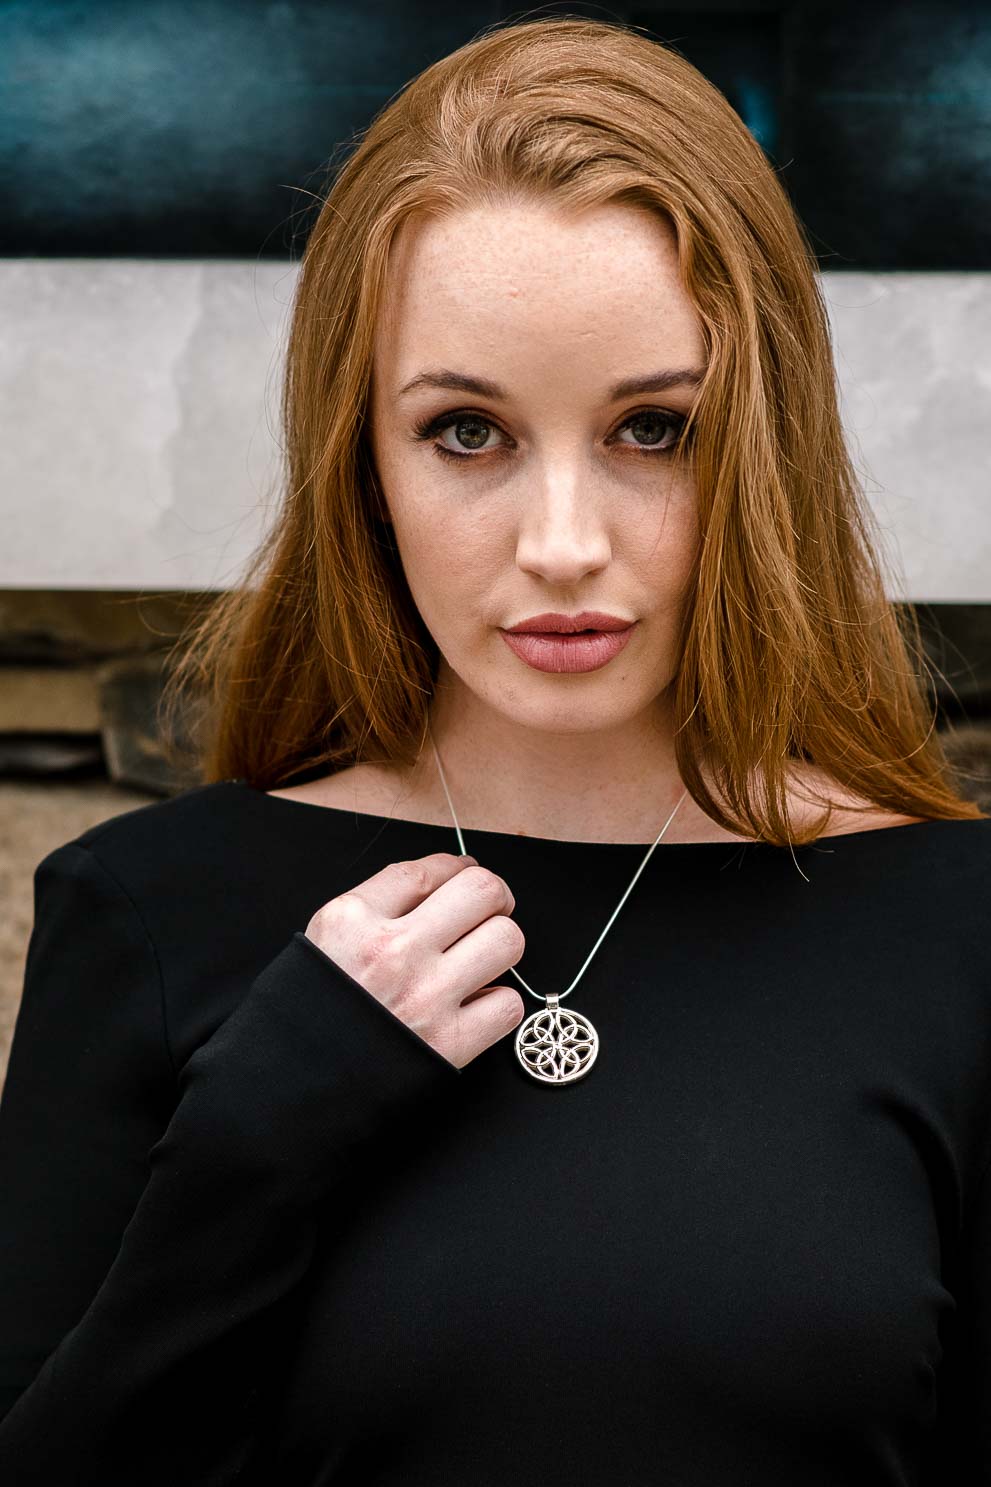 Irish Celtic Silver Dara Knot necklace being worn by a model. Made by NI Silver Jewellery of Holywood Northern Ireland.